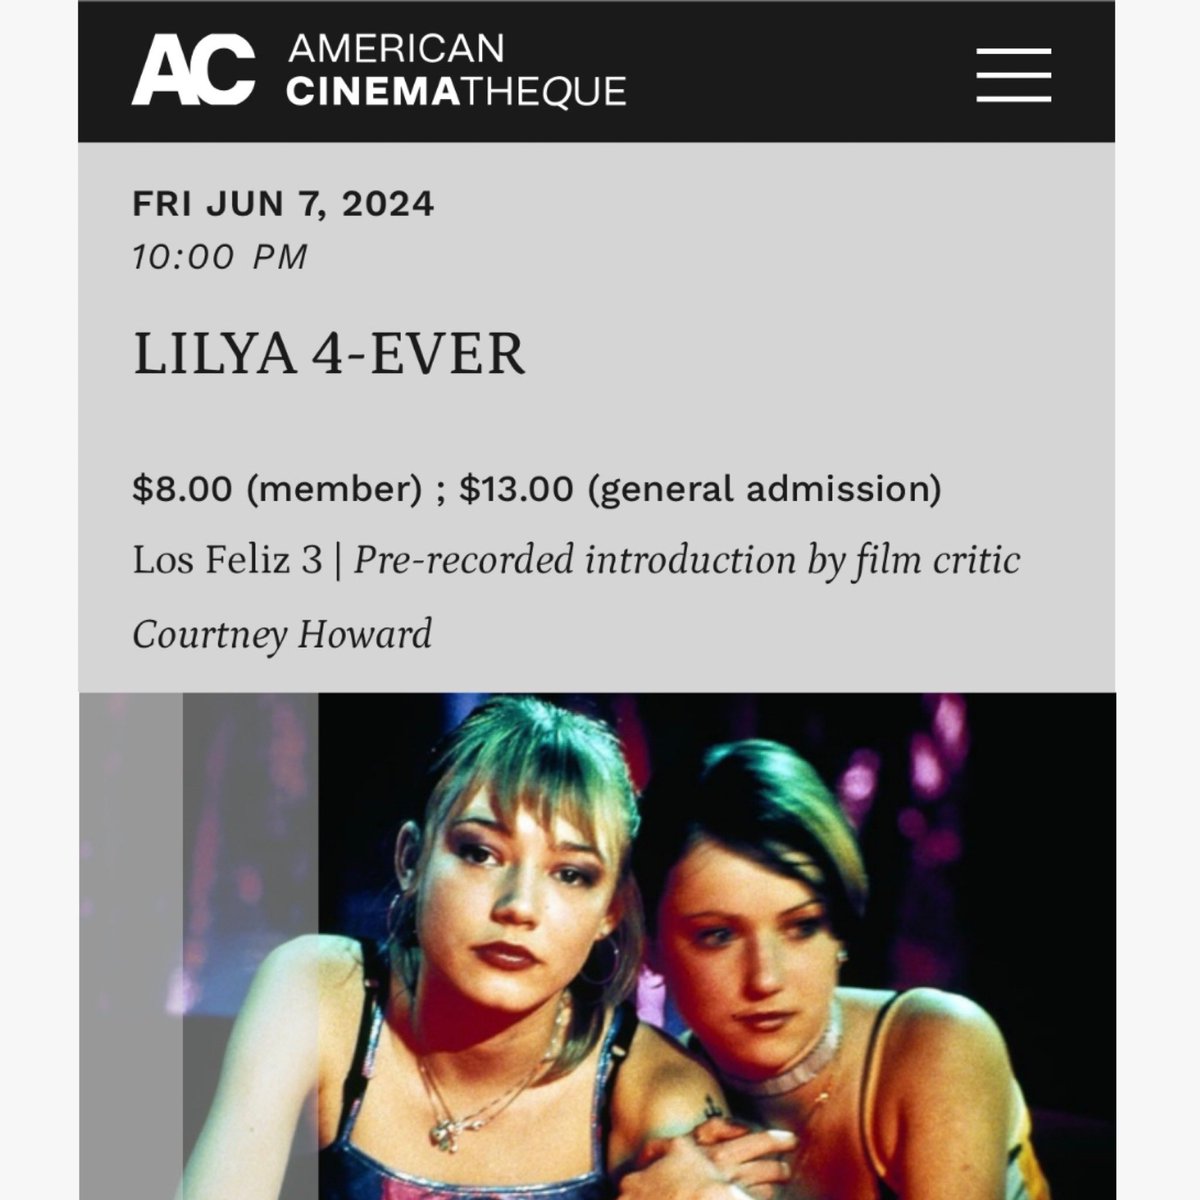 To celebrate #BleakWeek at @am_cinematheque, I’ll be closing out the screening series introducing LILYA 4-EVER at the Los Feliz 3 on June 7. Buy a ticket and come feel the weight of this incredible film. americancinematheque.com/now-showing/li…